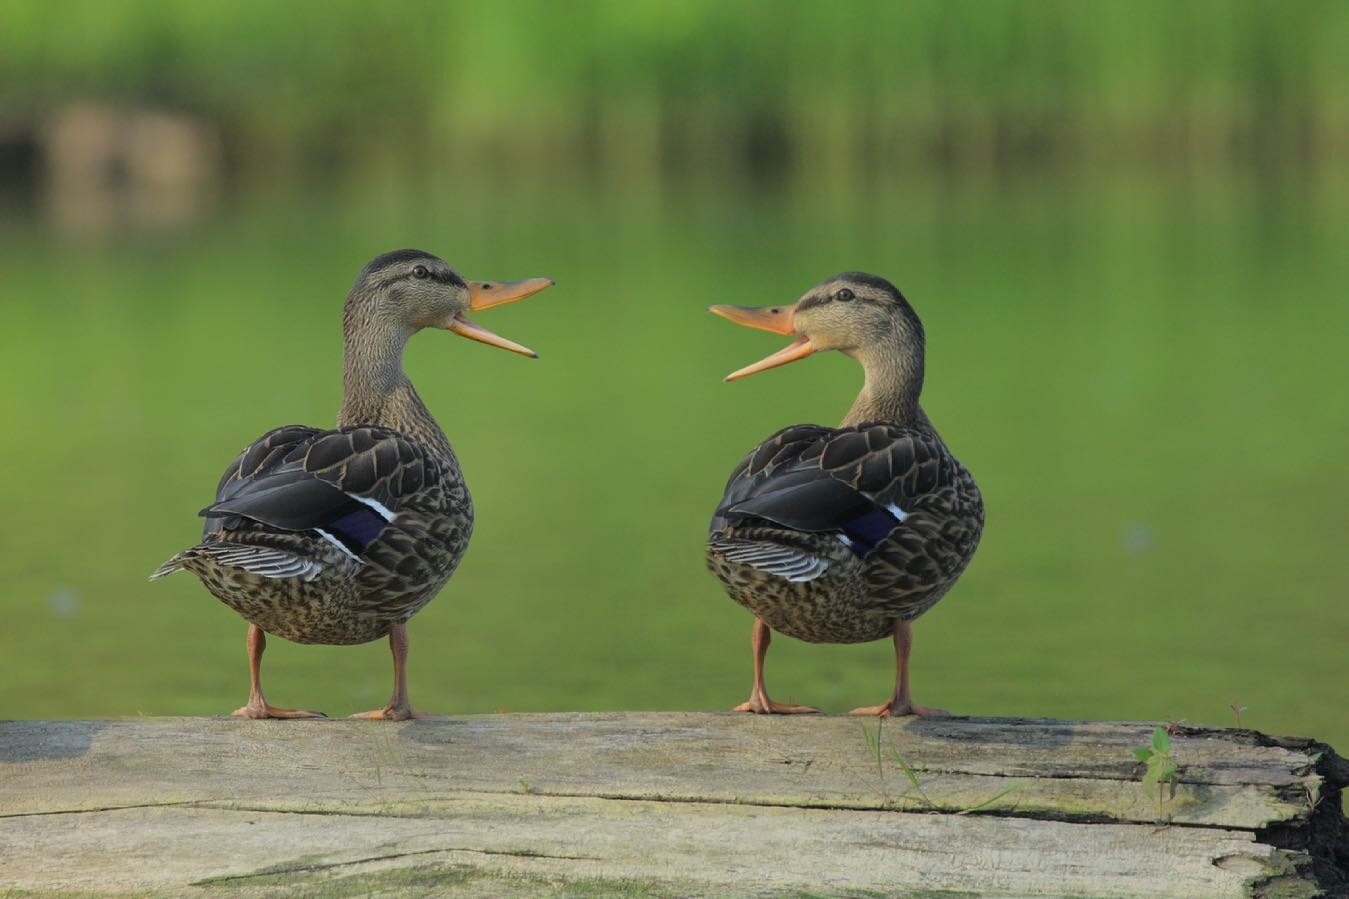 Hearing reports that it is the freakin&rsquo; weekend. 

Time to head to the watering hole and quack loudly at our friends about the latest celebrity gossip, CDC guidelines, and cicada emergence. 

🦆🦆🦆

📸: Gary Bendig/Unsplash

#potomacriver #mal